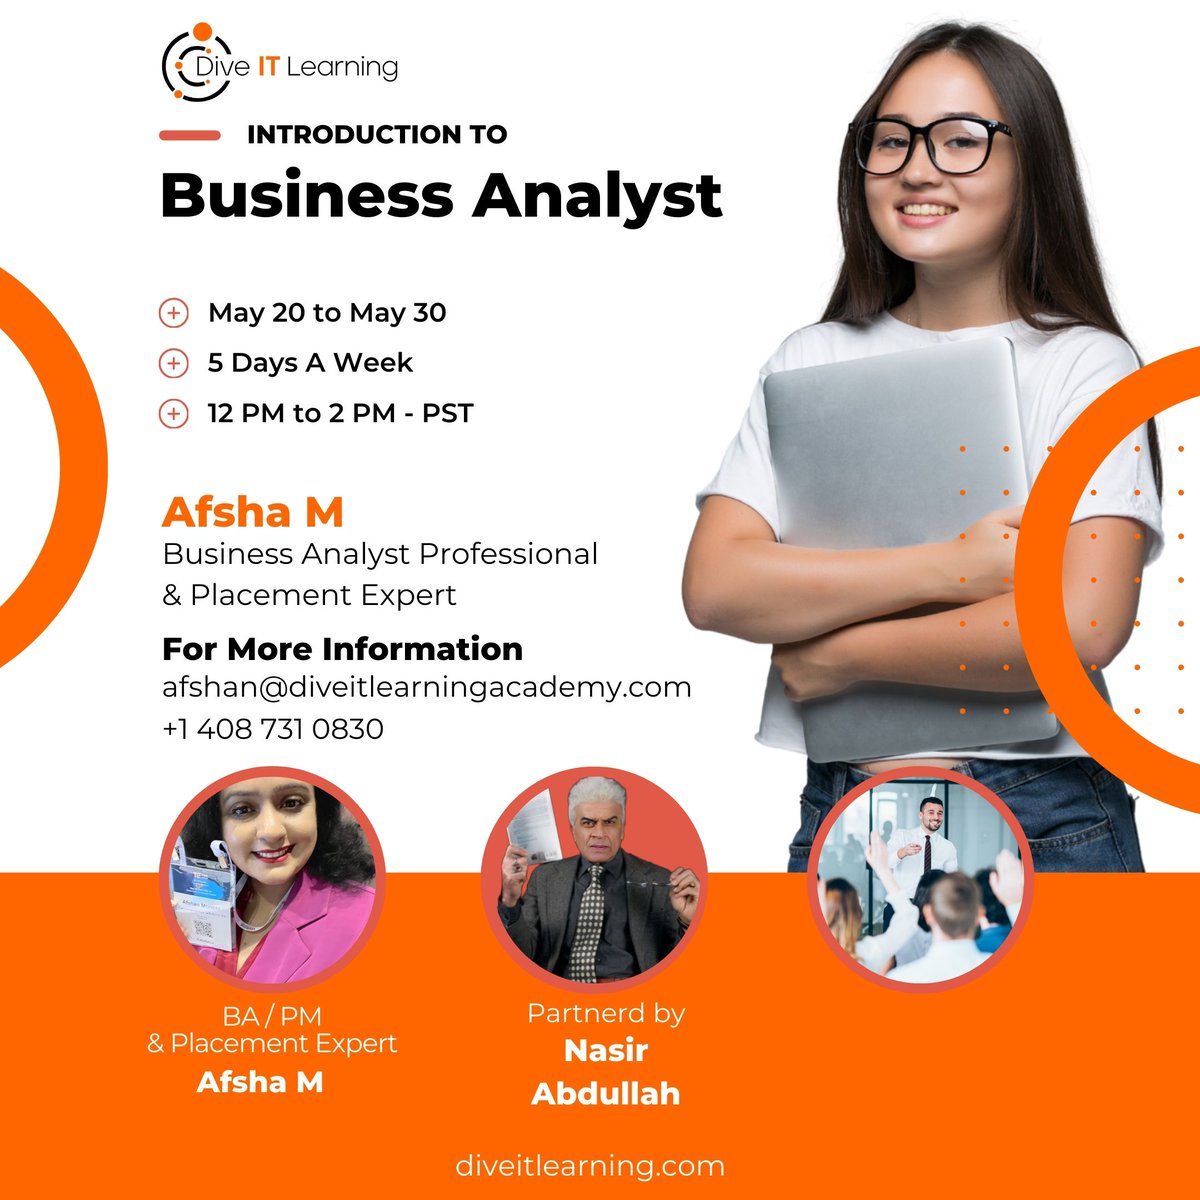 Hurry! Limited seats left for Dive IT Learning's Business Analysis classes from May 20 to 30. Enroll now to secure your spot and elevate your career! #BAClasses #EnrollNow #DiveITLearning